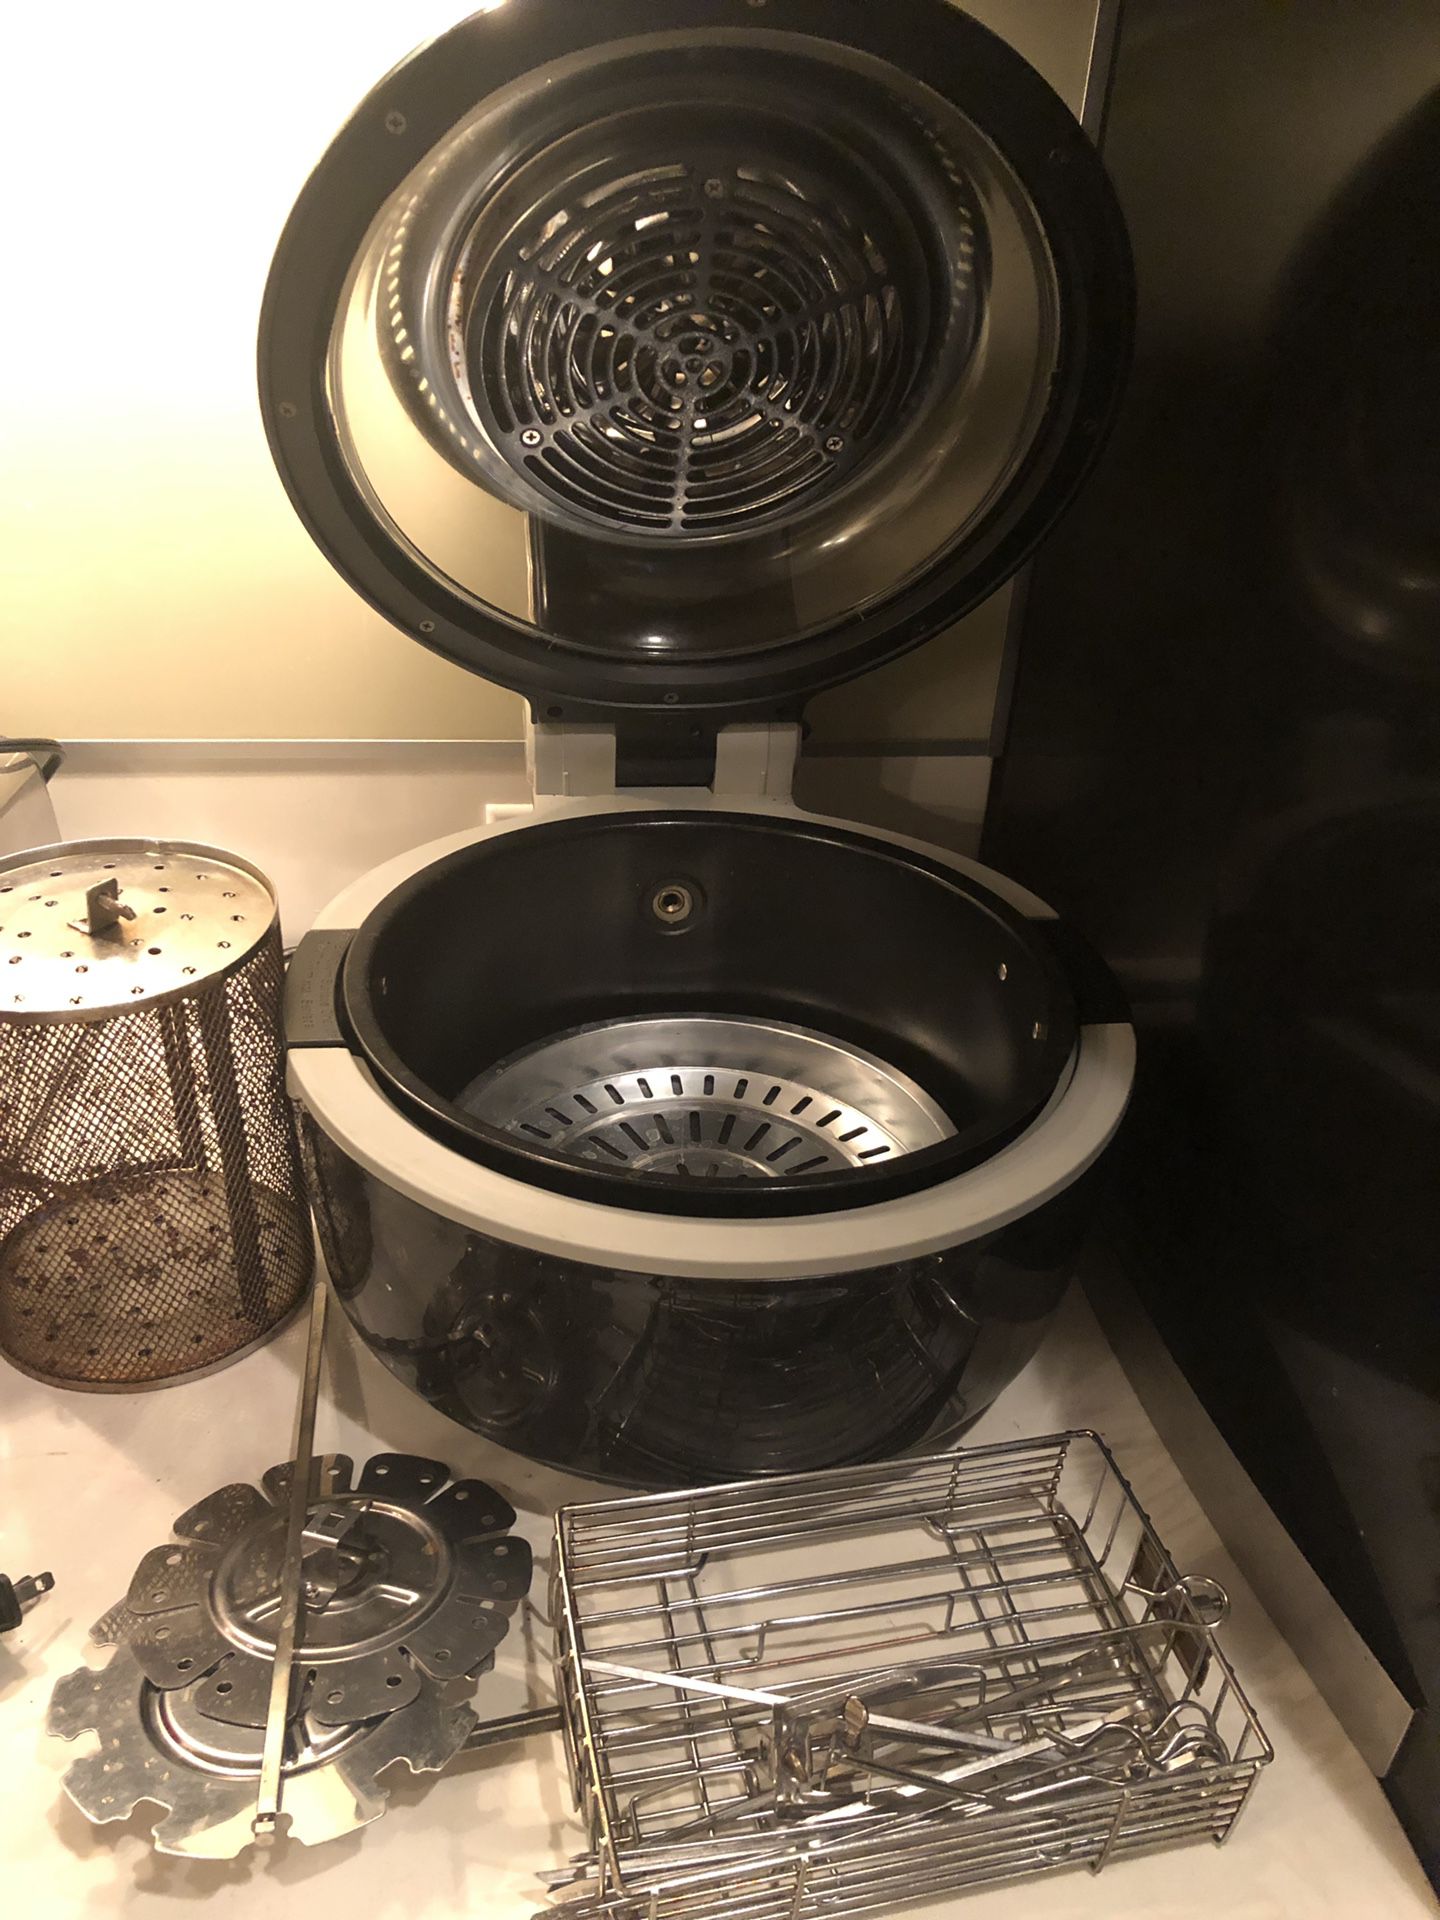 Aumate 19 Quart Air Fryer - Brand New In Box for Sale in Amsterdam, NY -  OfferUp